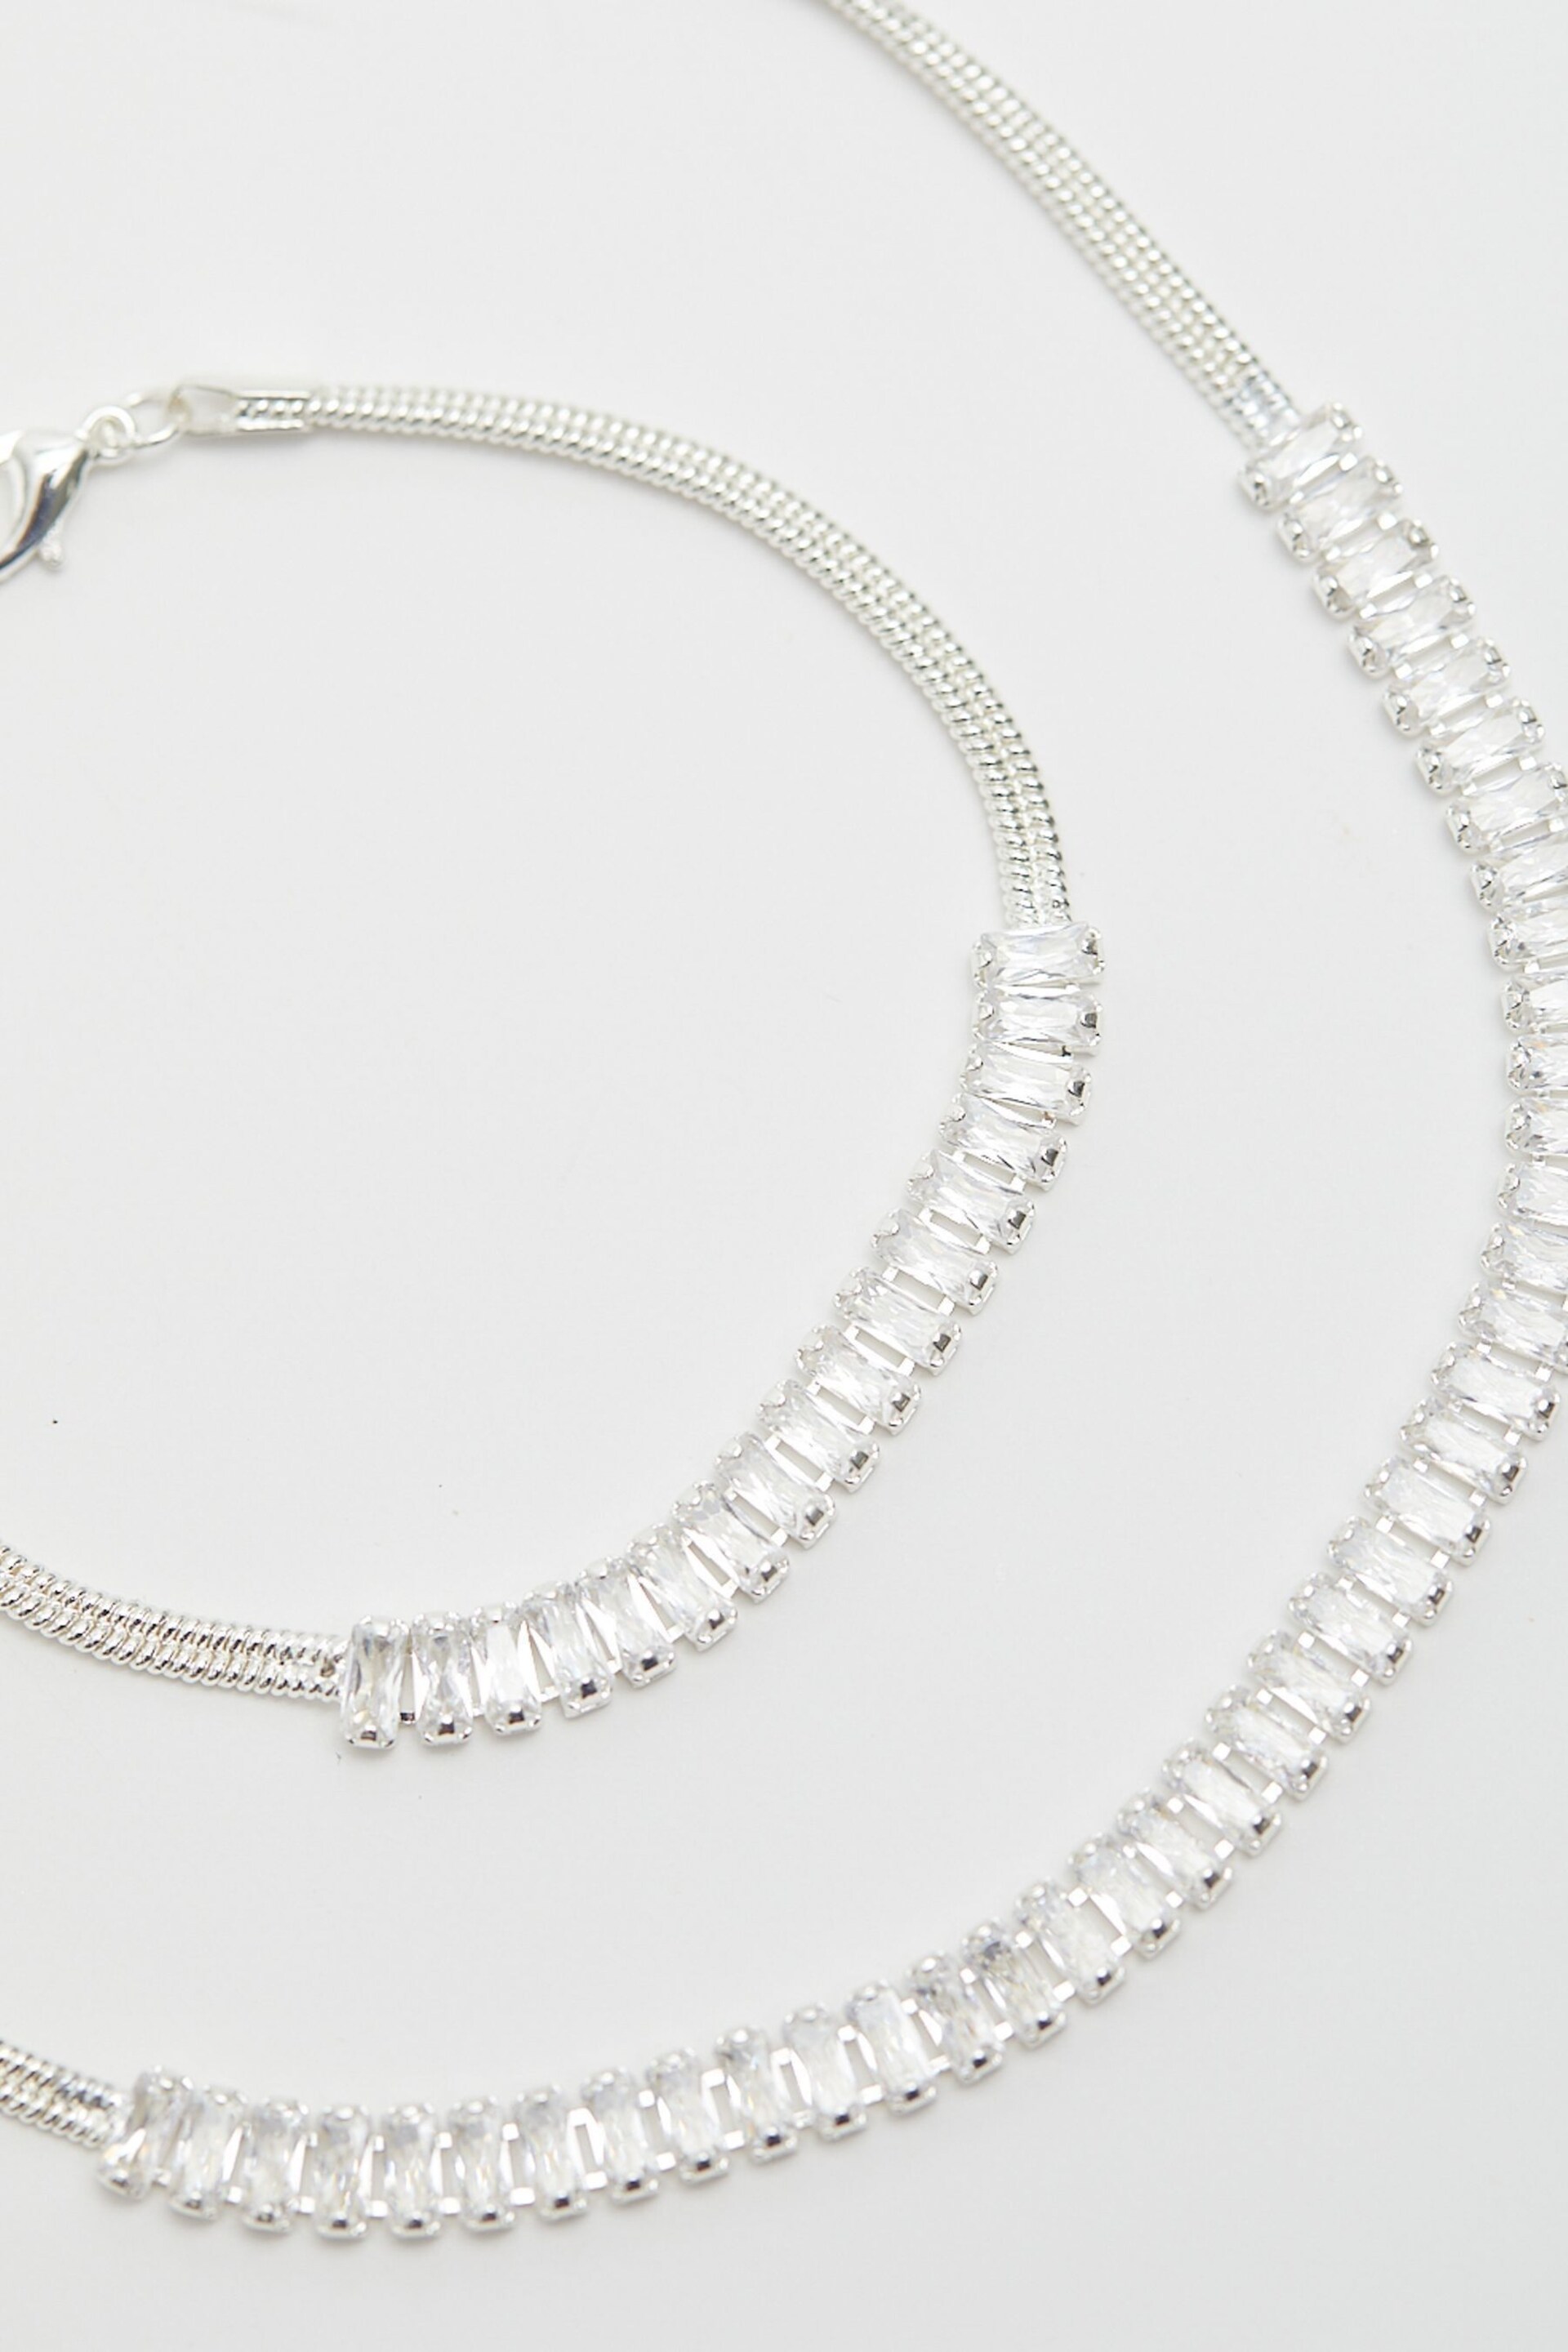 Mood Silver Tone Crystal Baguette Choker Necklace - Image 3 of 4